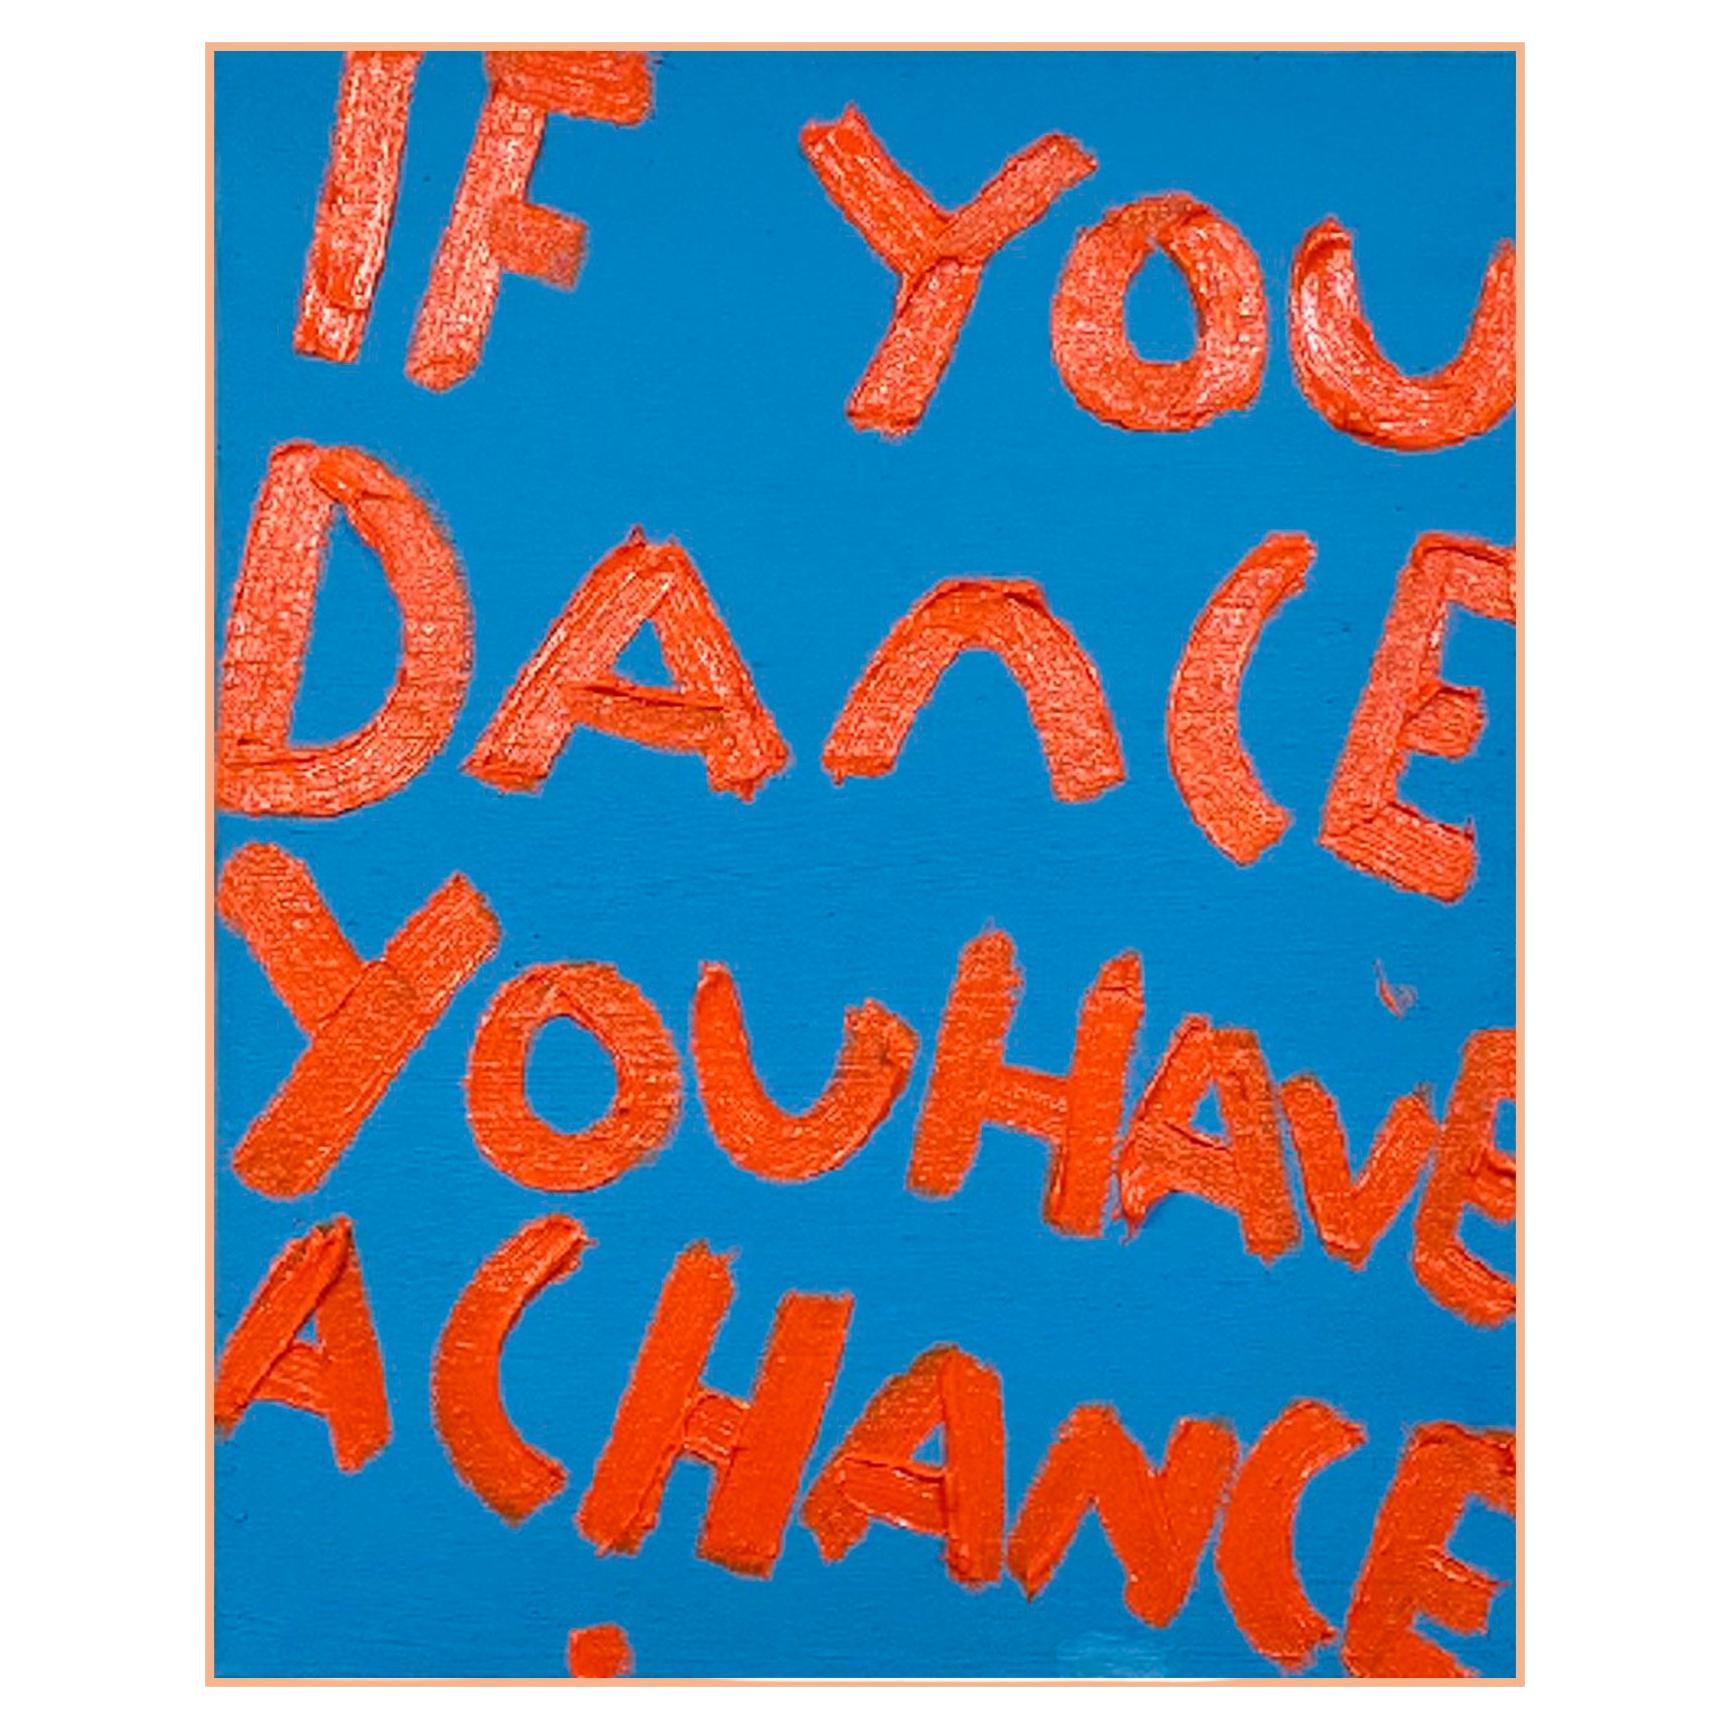 Chance and Dance, 2022, Eric Stefanski. Oil and Acrylic On Canvas For Sale